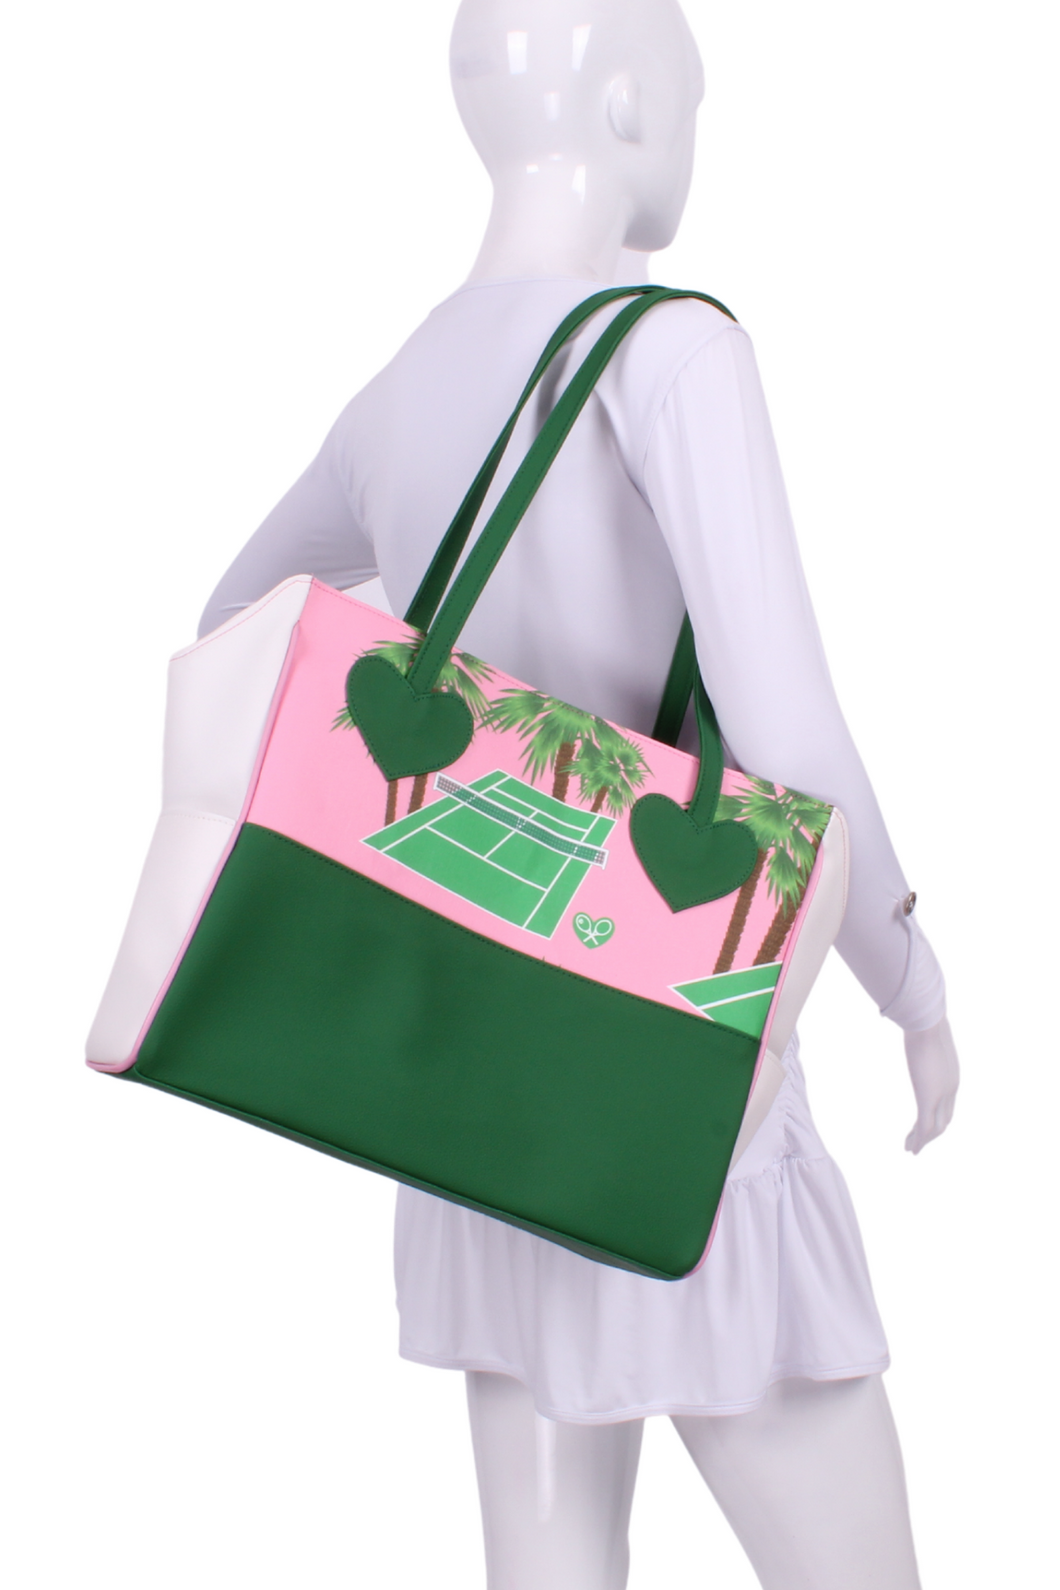 Courts + Palm on Pink Mini LOVE Tote Tennis Bag - I LOVE MY DOUBLES PARTNER!!!